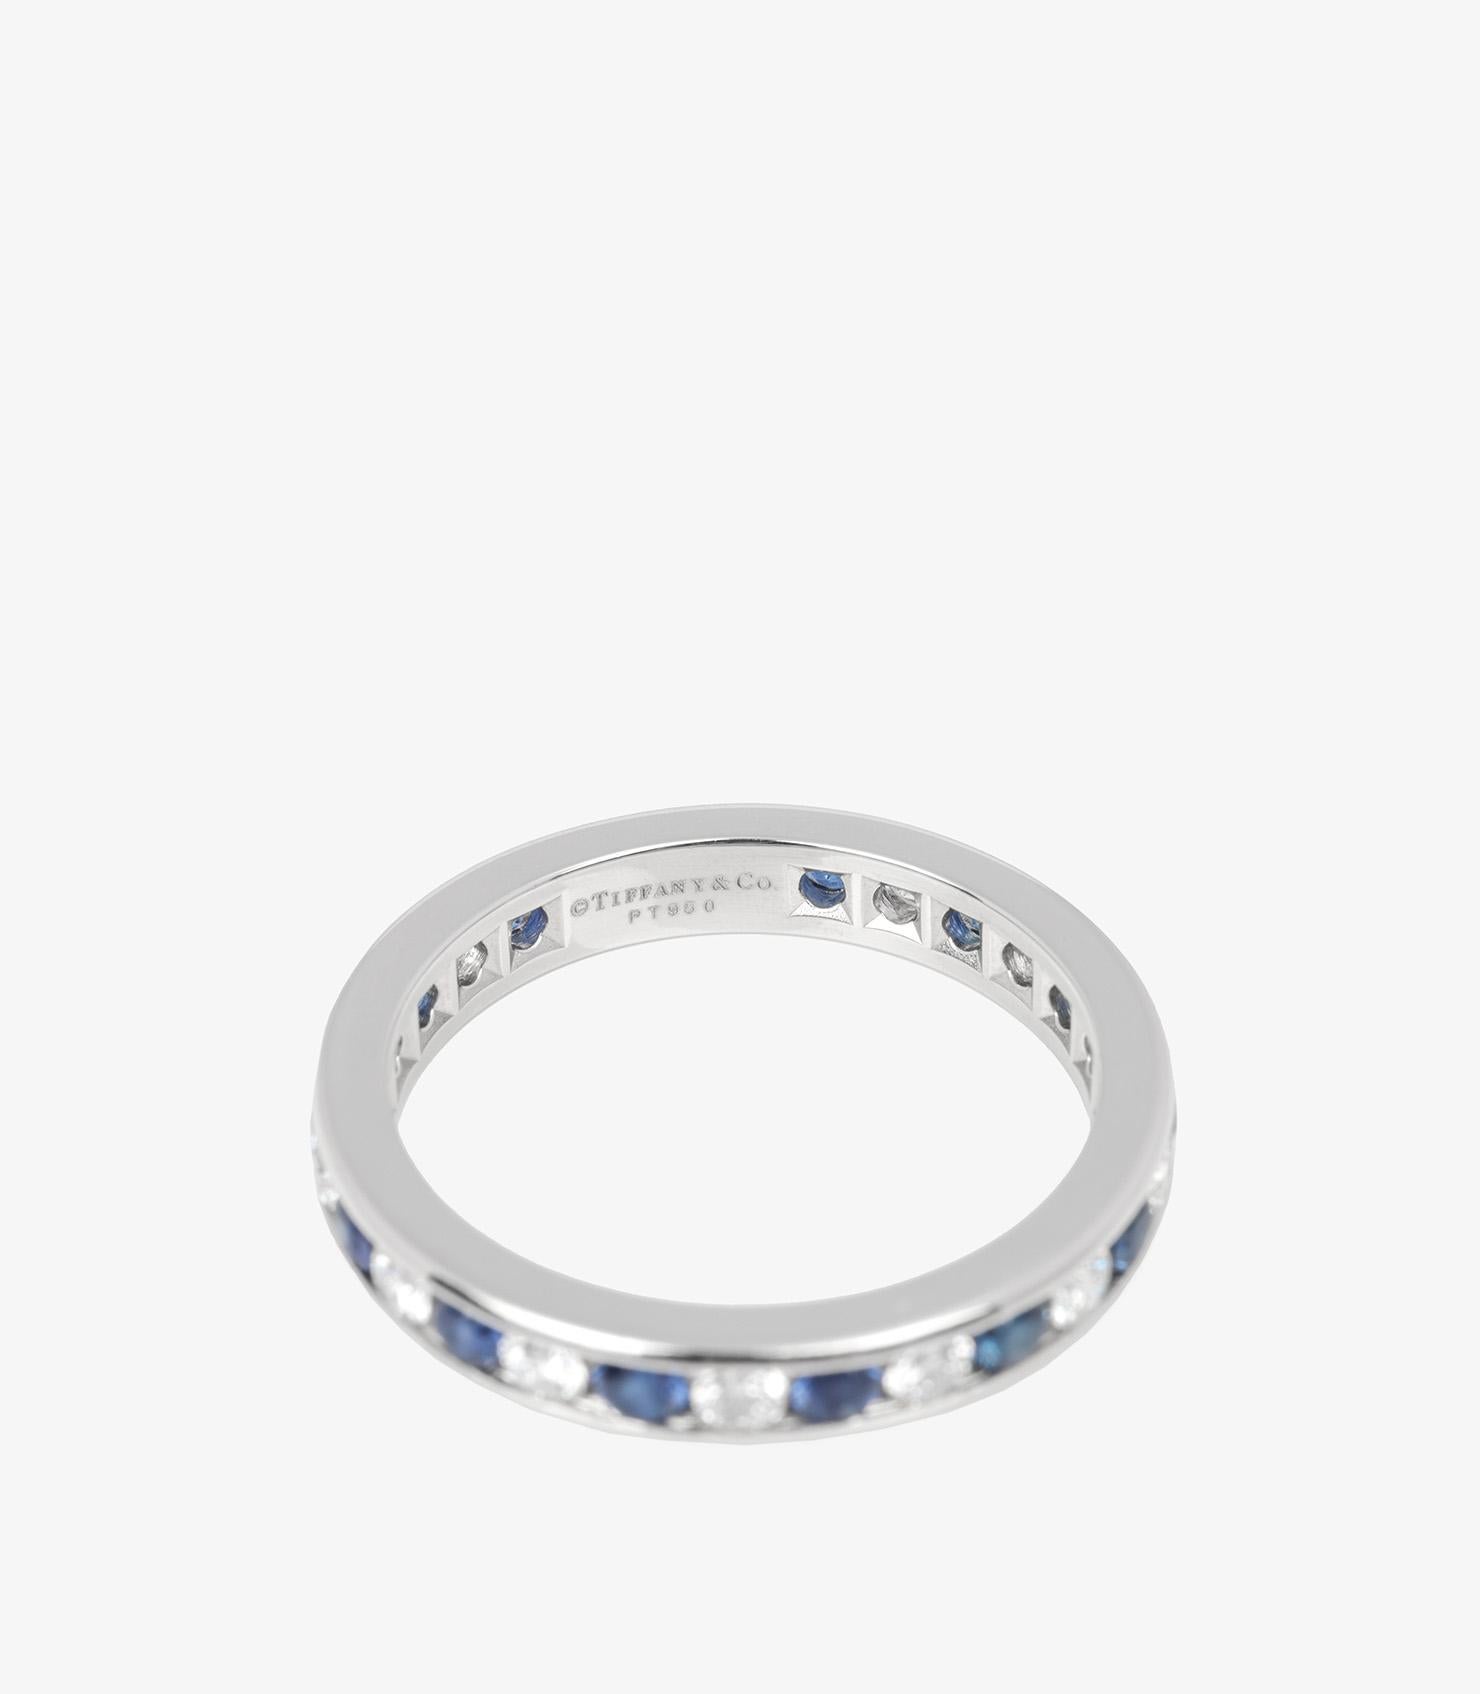 Tiffany & Co. Brilliant Cut Sapphire and Diamond Platinum Full Eternity Ring In Good Condition For Sale In Bishop's Stortford, Hertfordshire